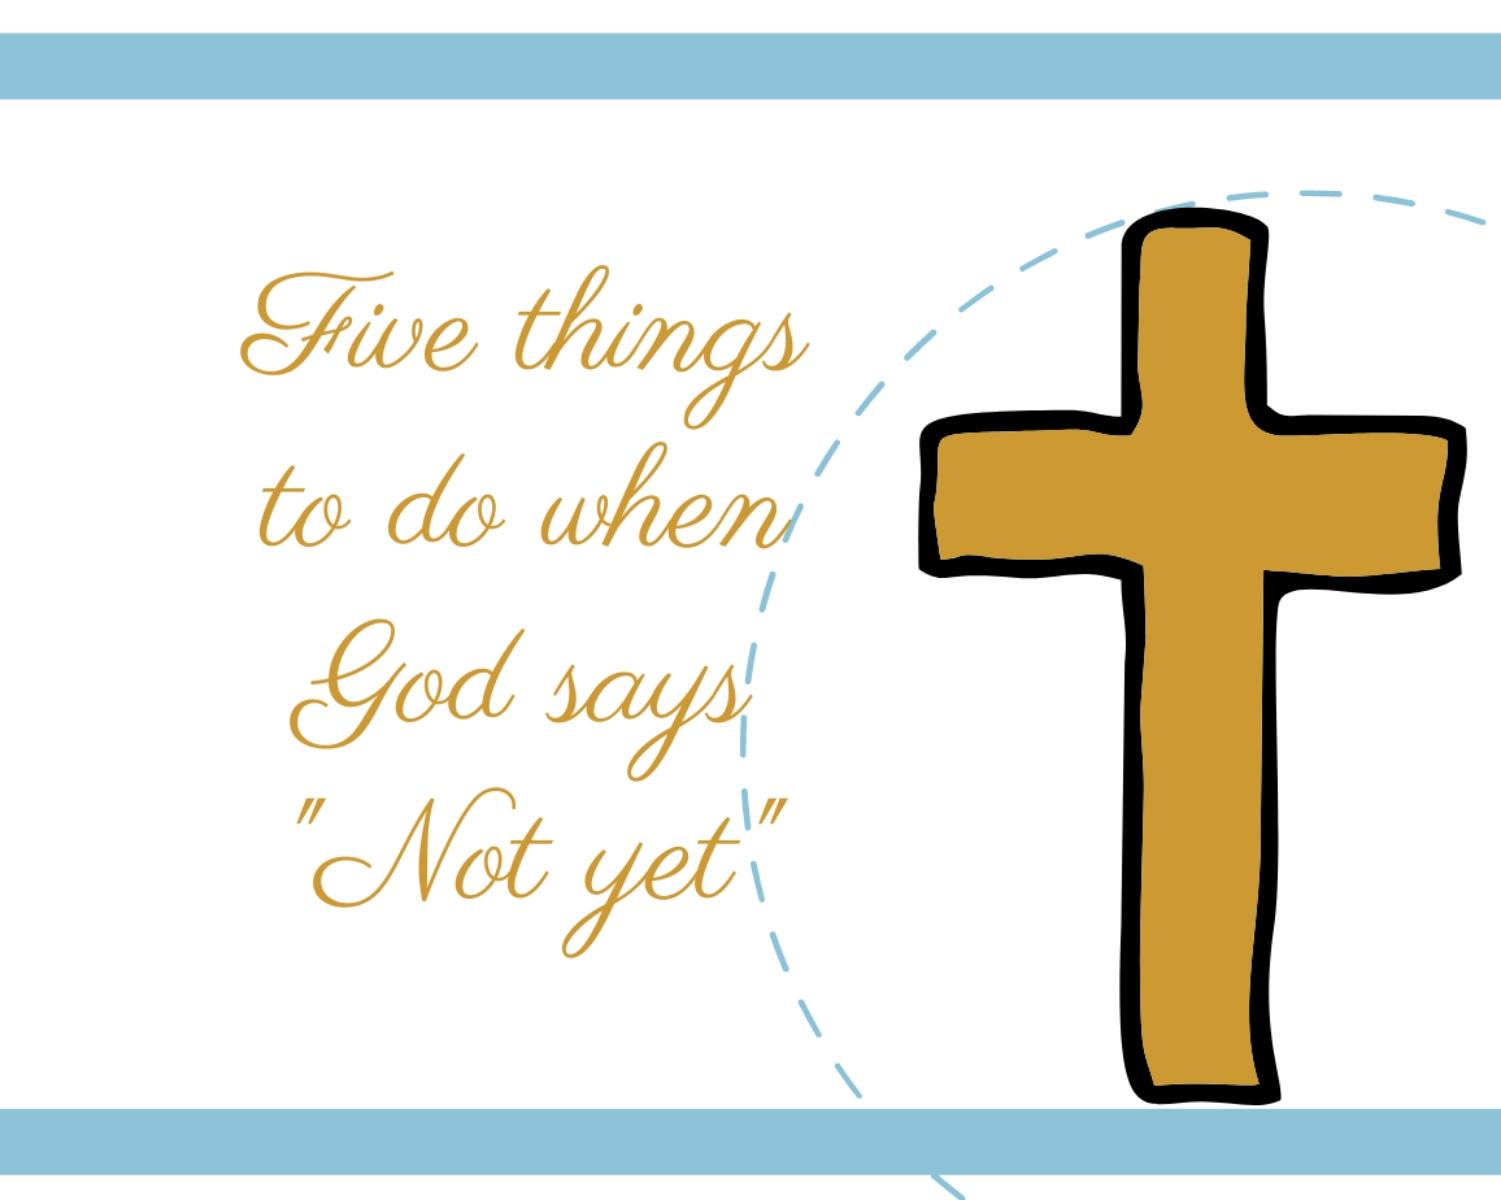 5 Things To Do When God Says "Not Yet"